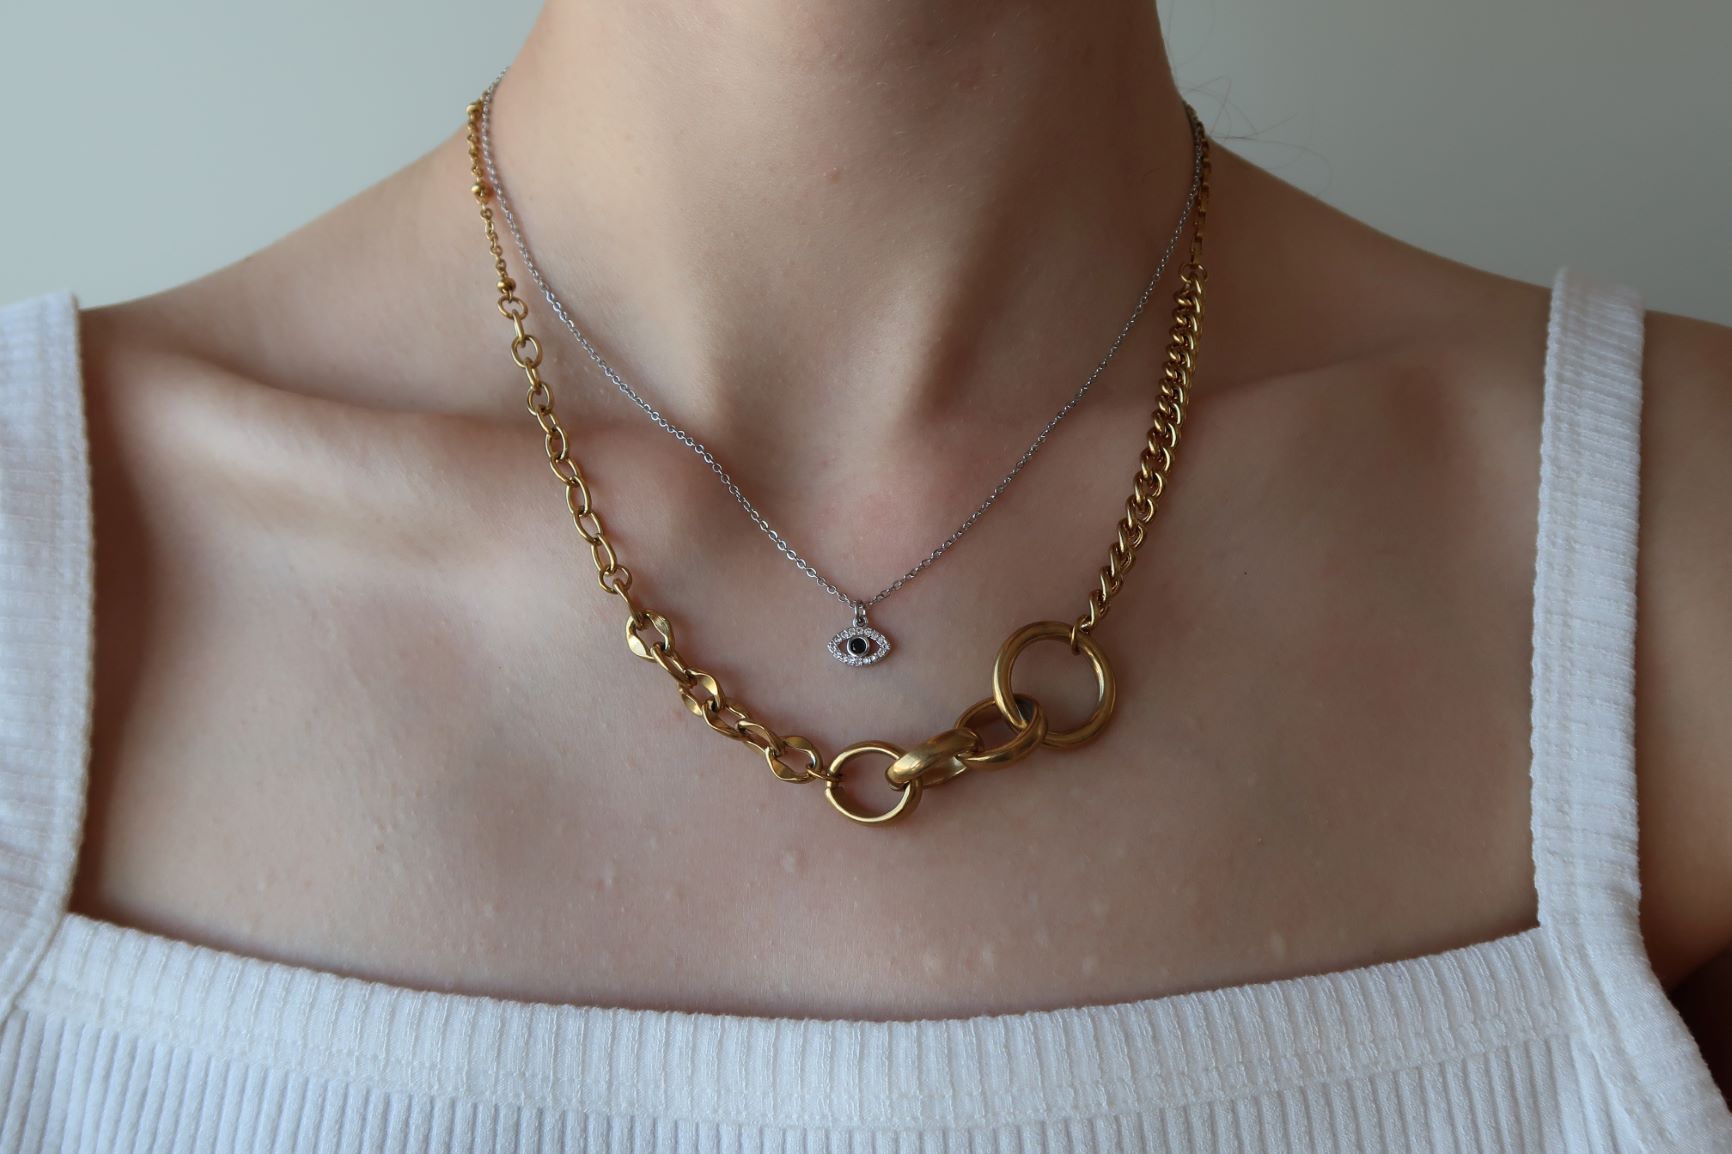 Golden Eye 8.0 Stainless Steel Necklace